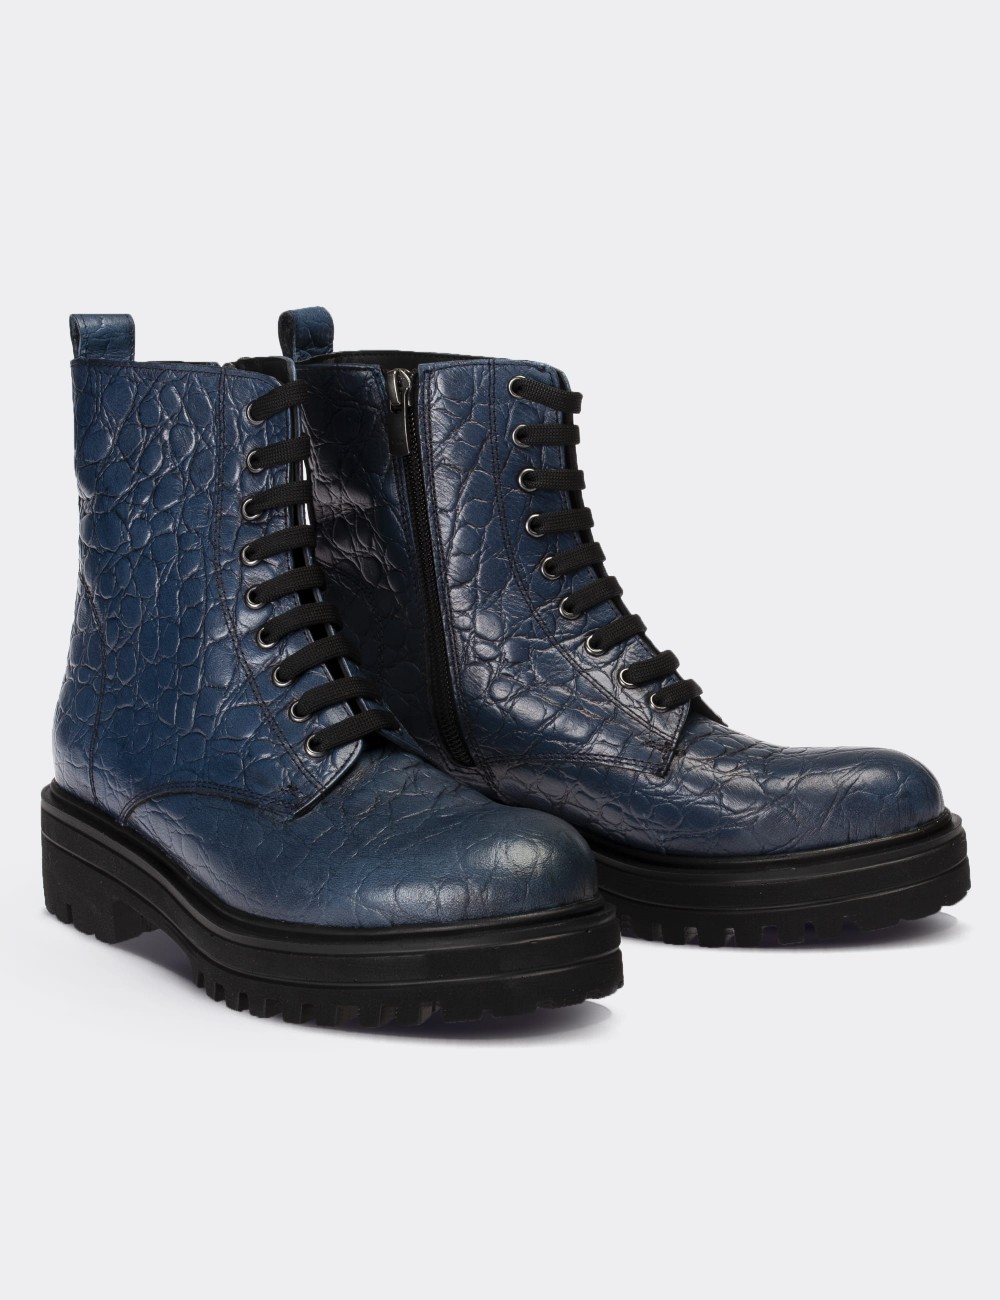 Blue  Leather Postal Boots - 01814ZMVIE10